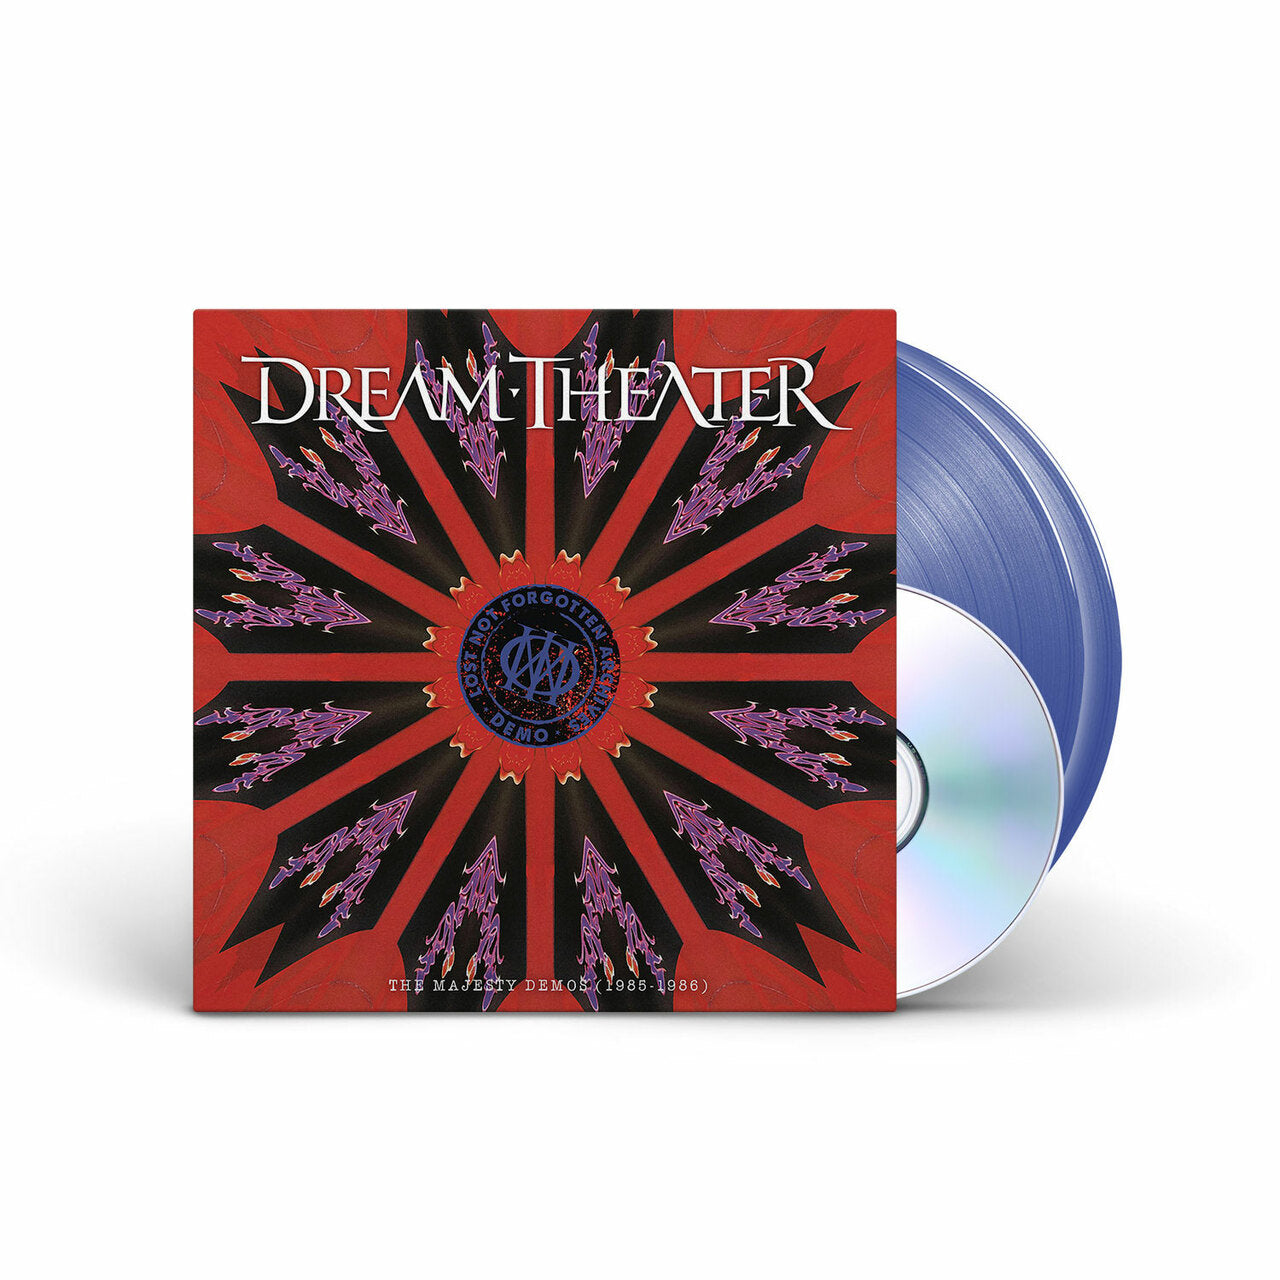 DREAM THEATER ‘LOST NOT FORGOTTEN ARCHIVES: THE MAJESTY DEMOS 1985-1986' 2LP + CD (Colbat Vinyl)